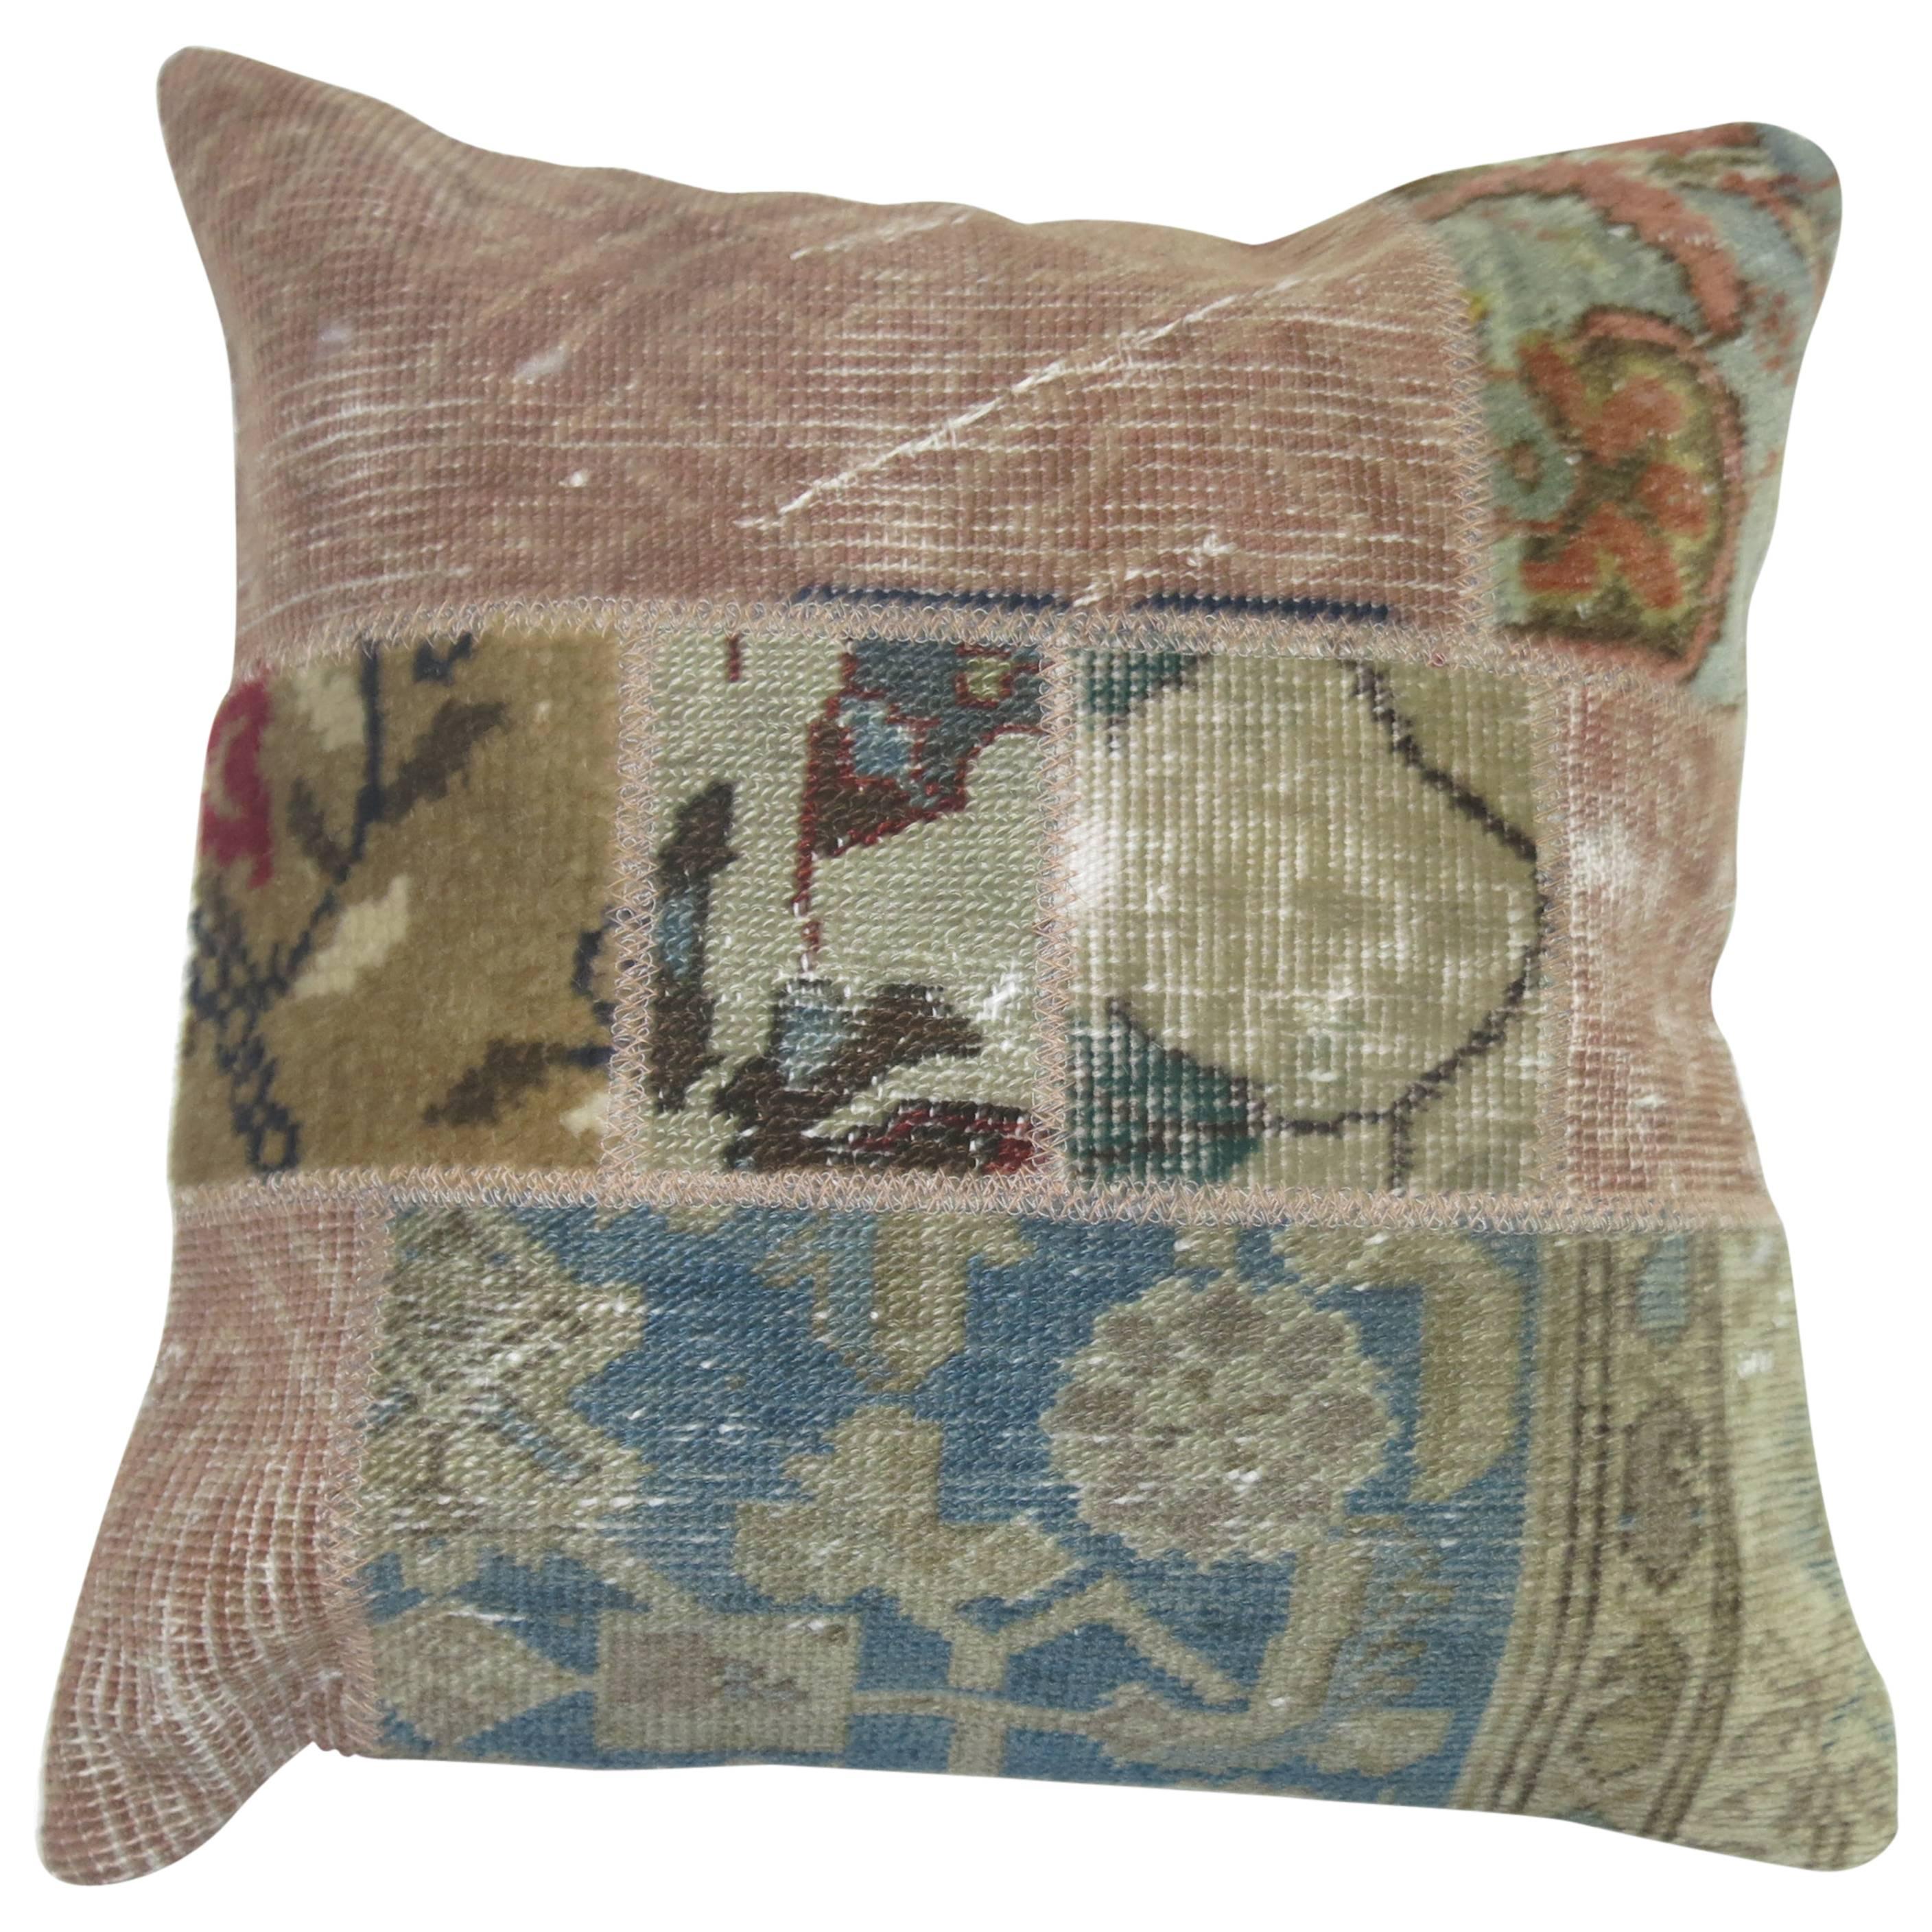 Rug Assortment Pillow For Sale